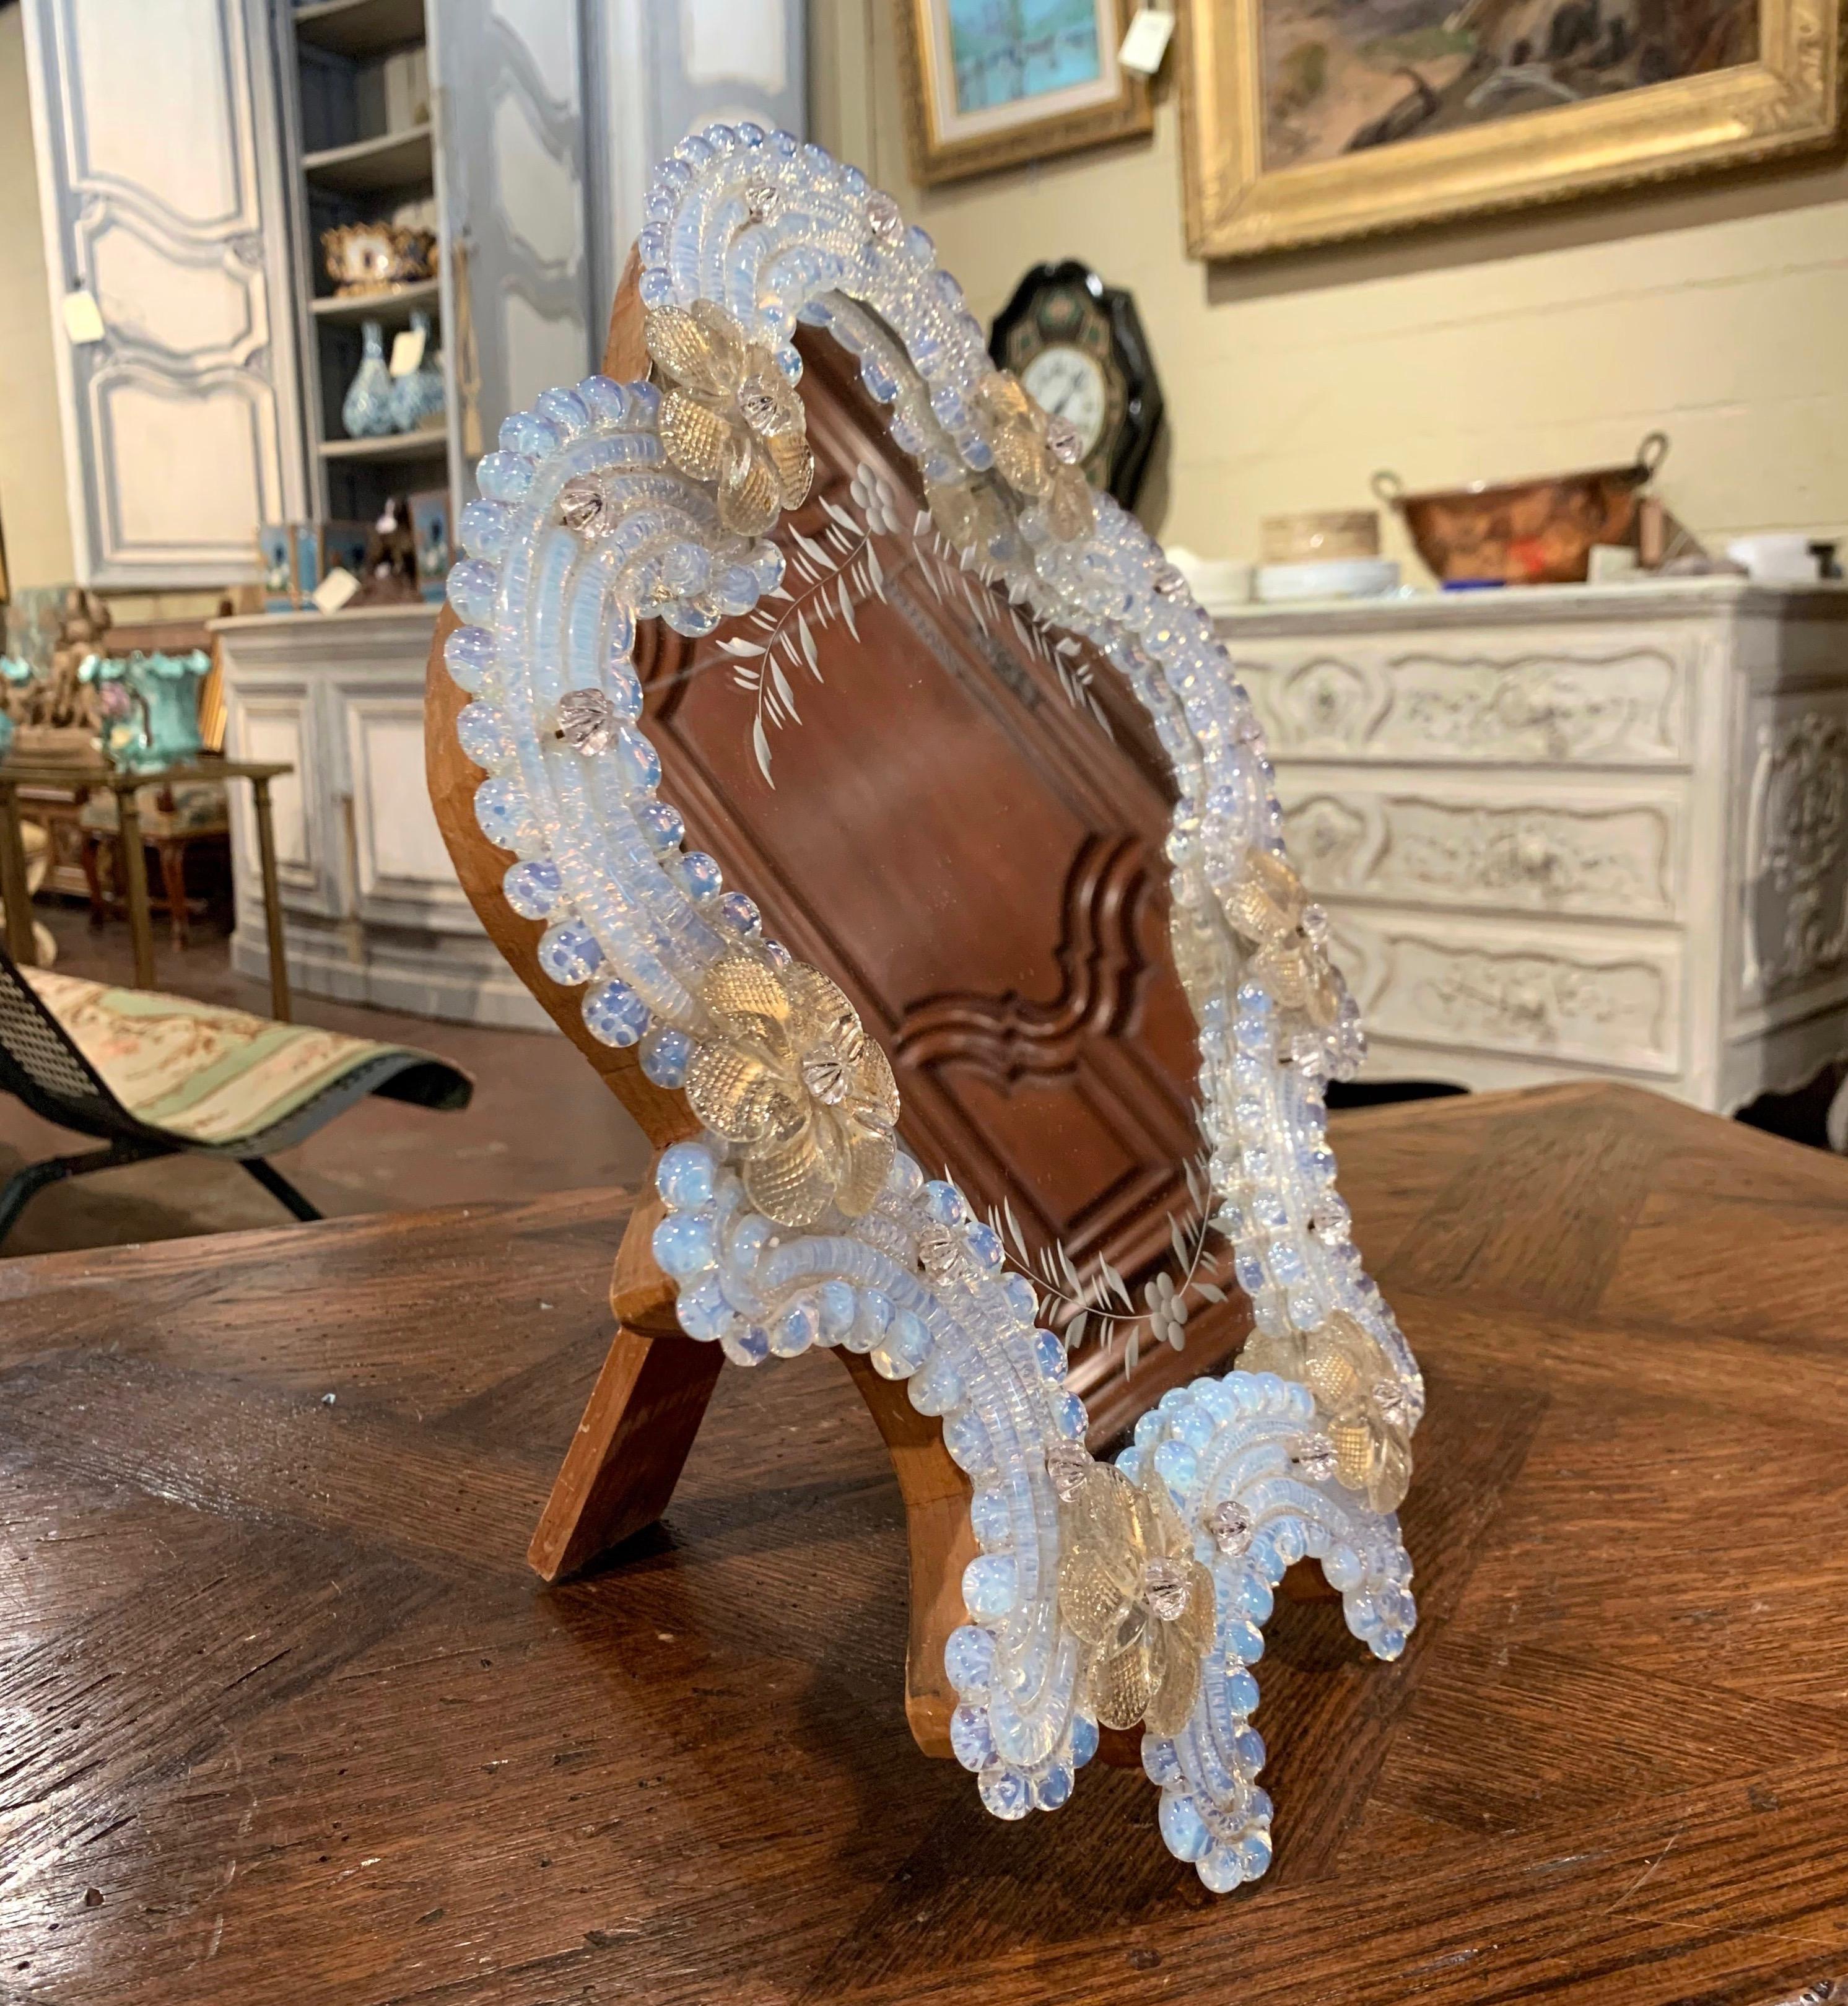 This elegant table mirror was created in Murano, Italy circa 1960, the free standing vanity mirror with wooden back is surrounded with handmade clear and gold Bohemian flowers. The decorative mirror is in excellent condition and further embellished